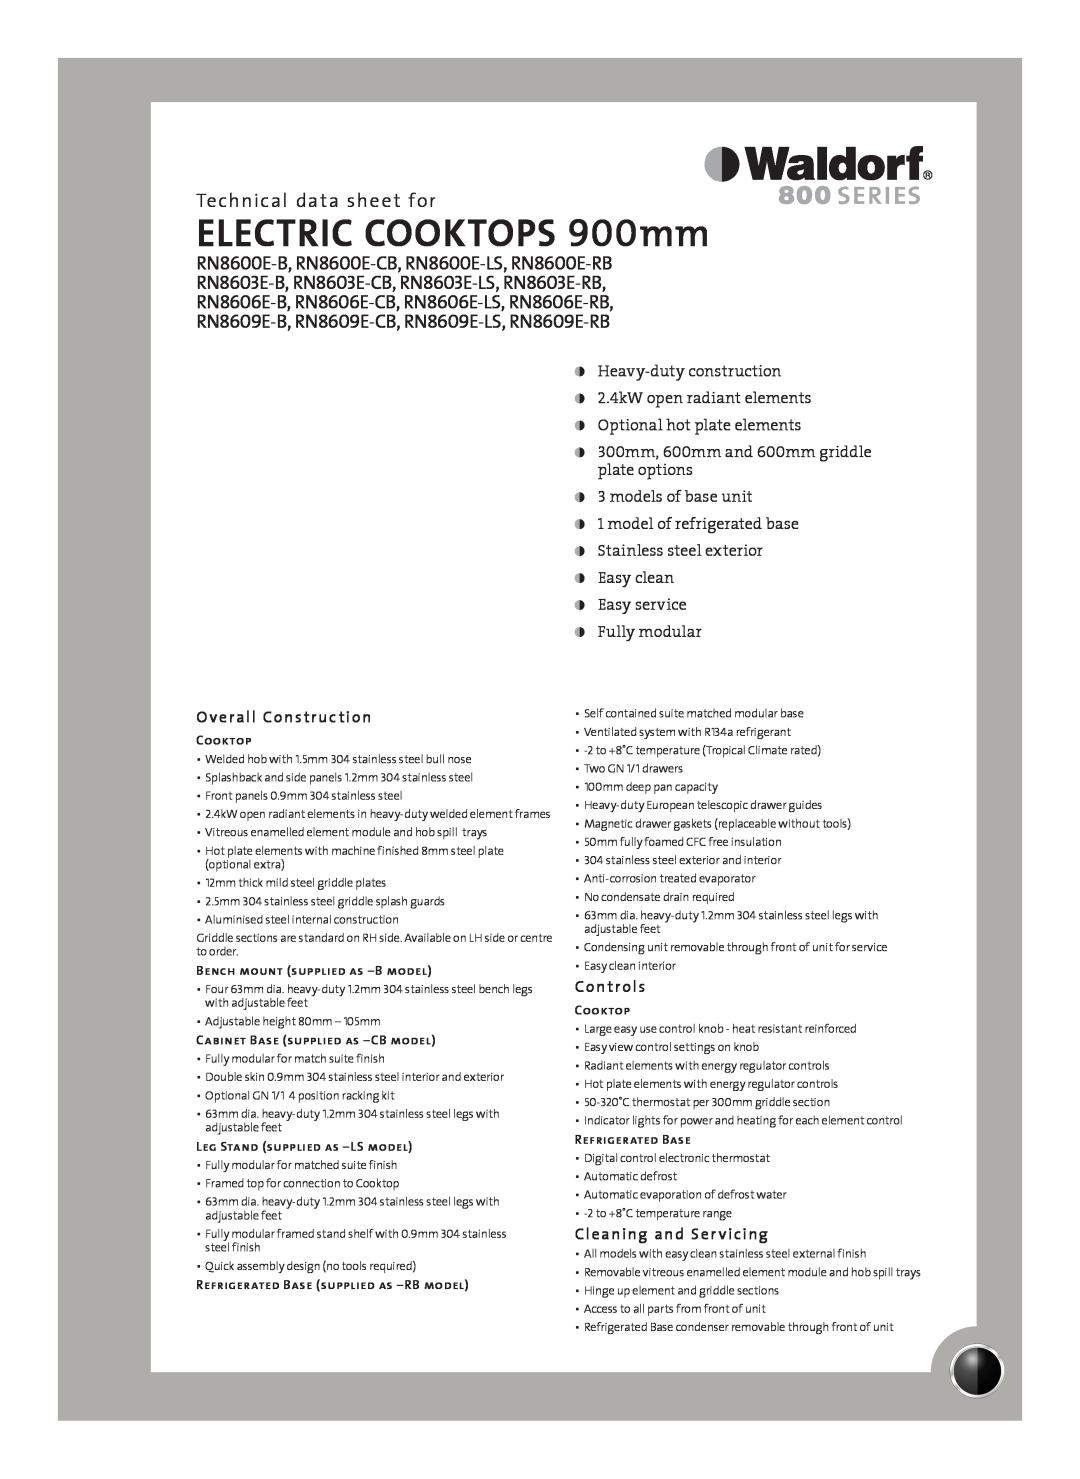 Moffat RN8609E-CB manual Technical data sheet for, Overall Construction, Controls, Cleaning and Ser vicing, Cooktop 